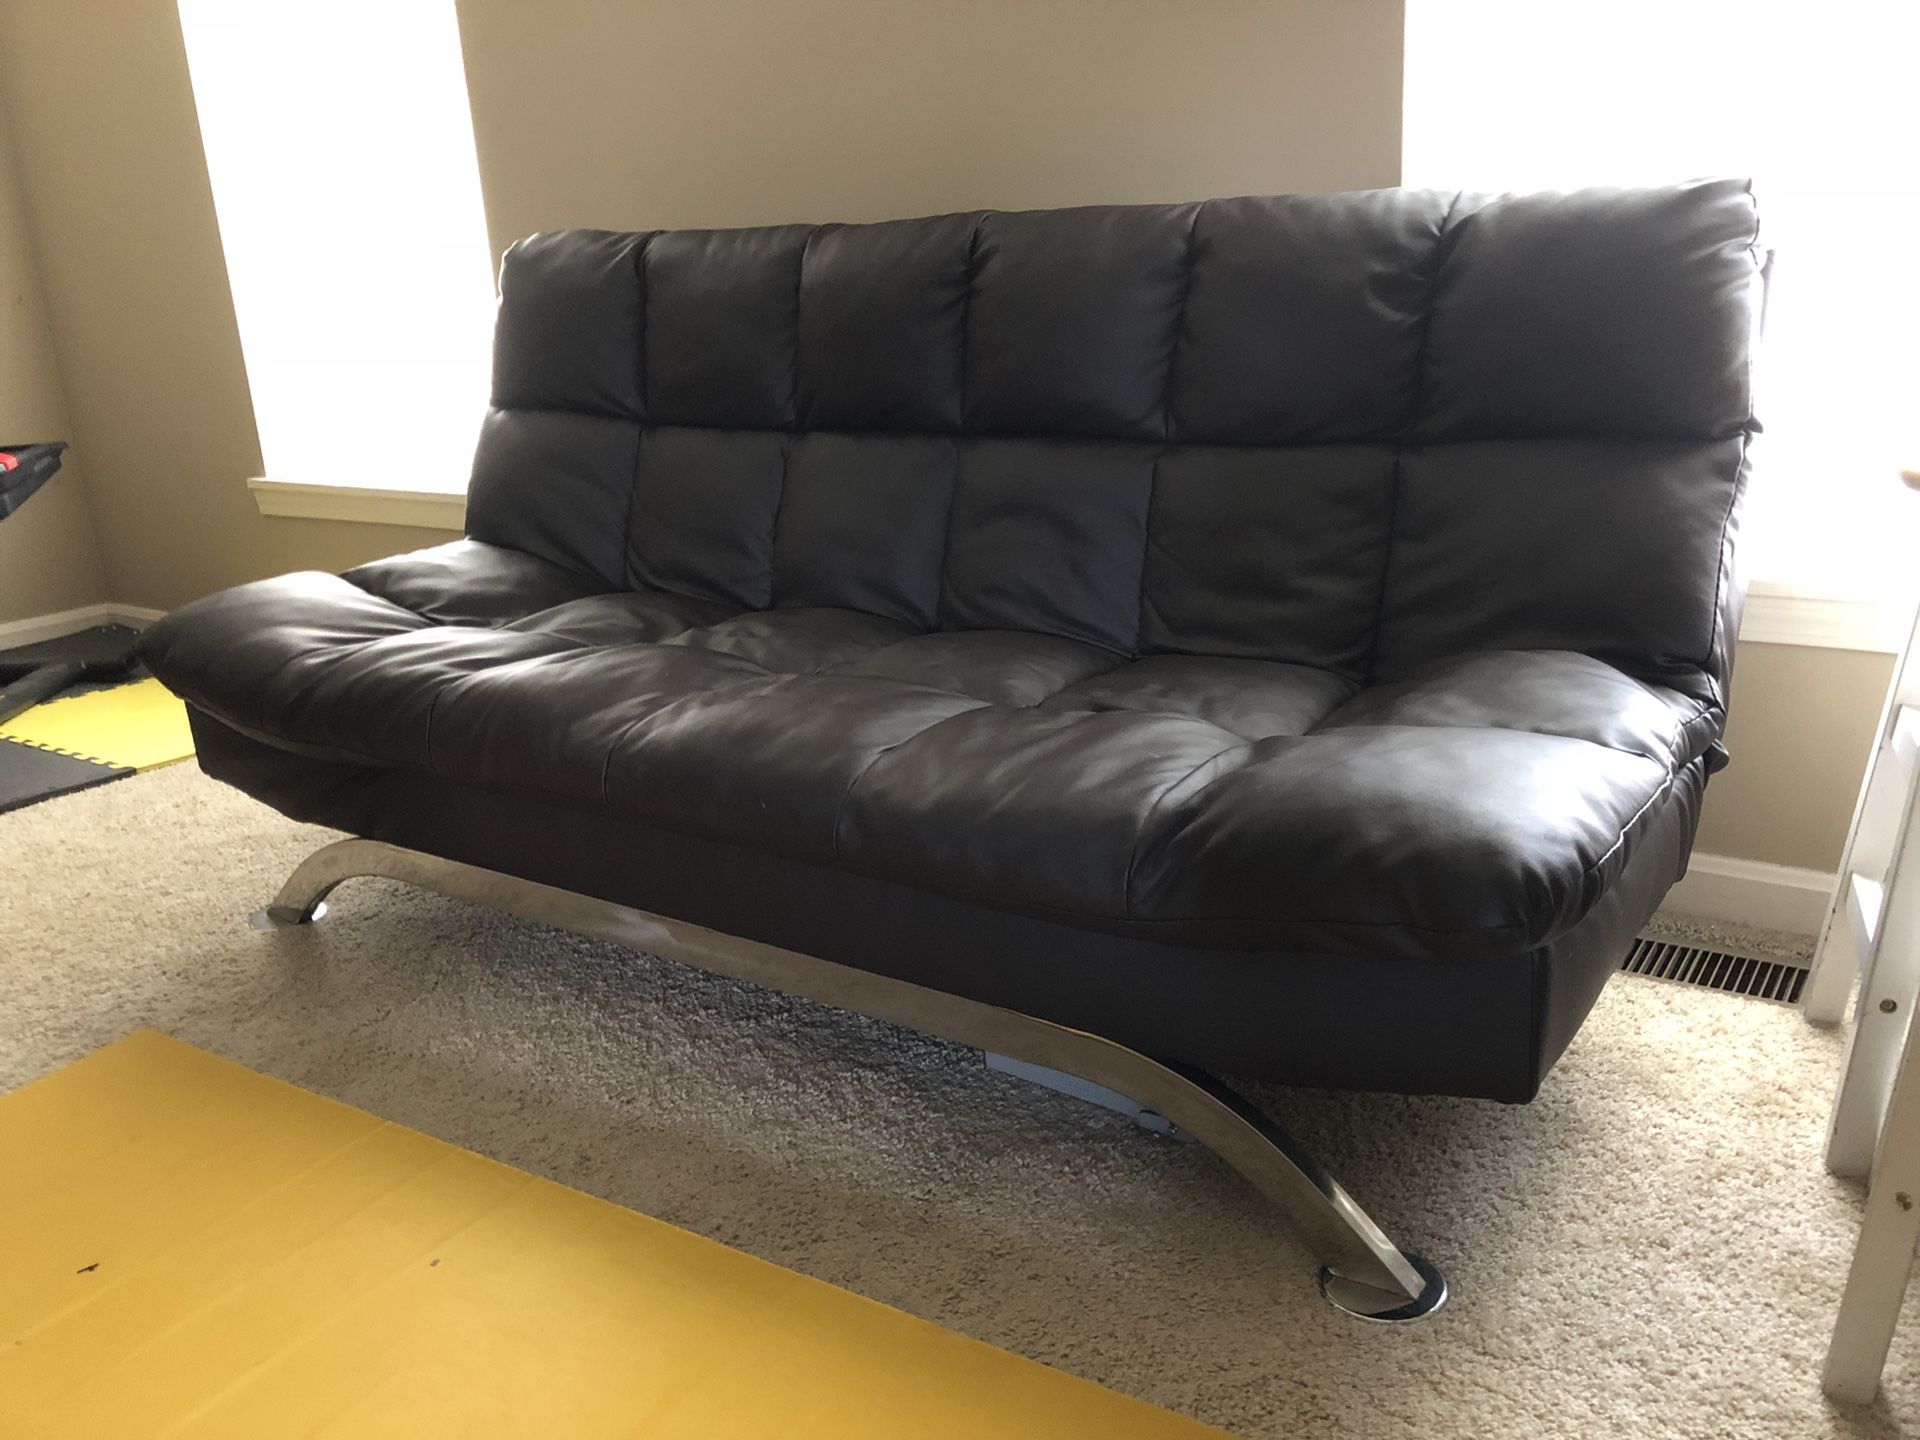 Leather vinyl brown futon couch and 2 chairs.